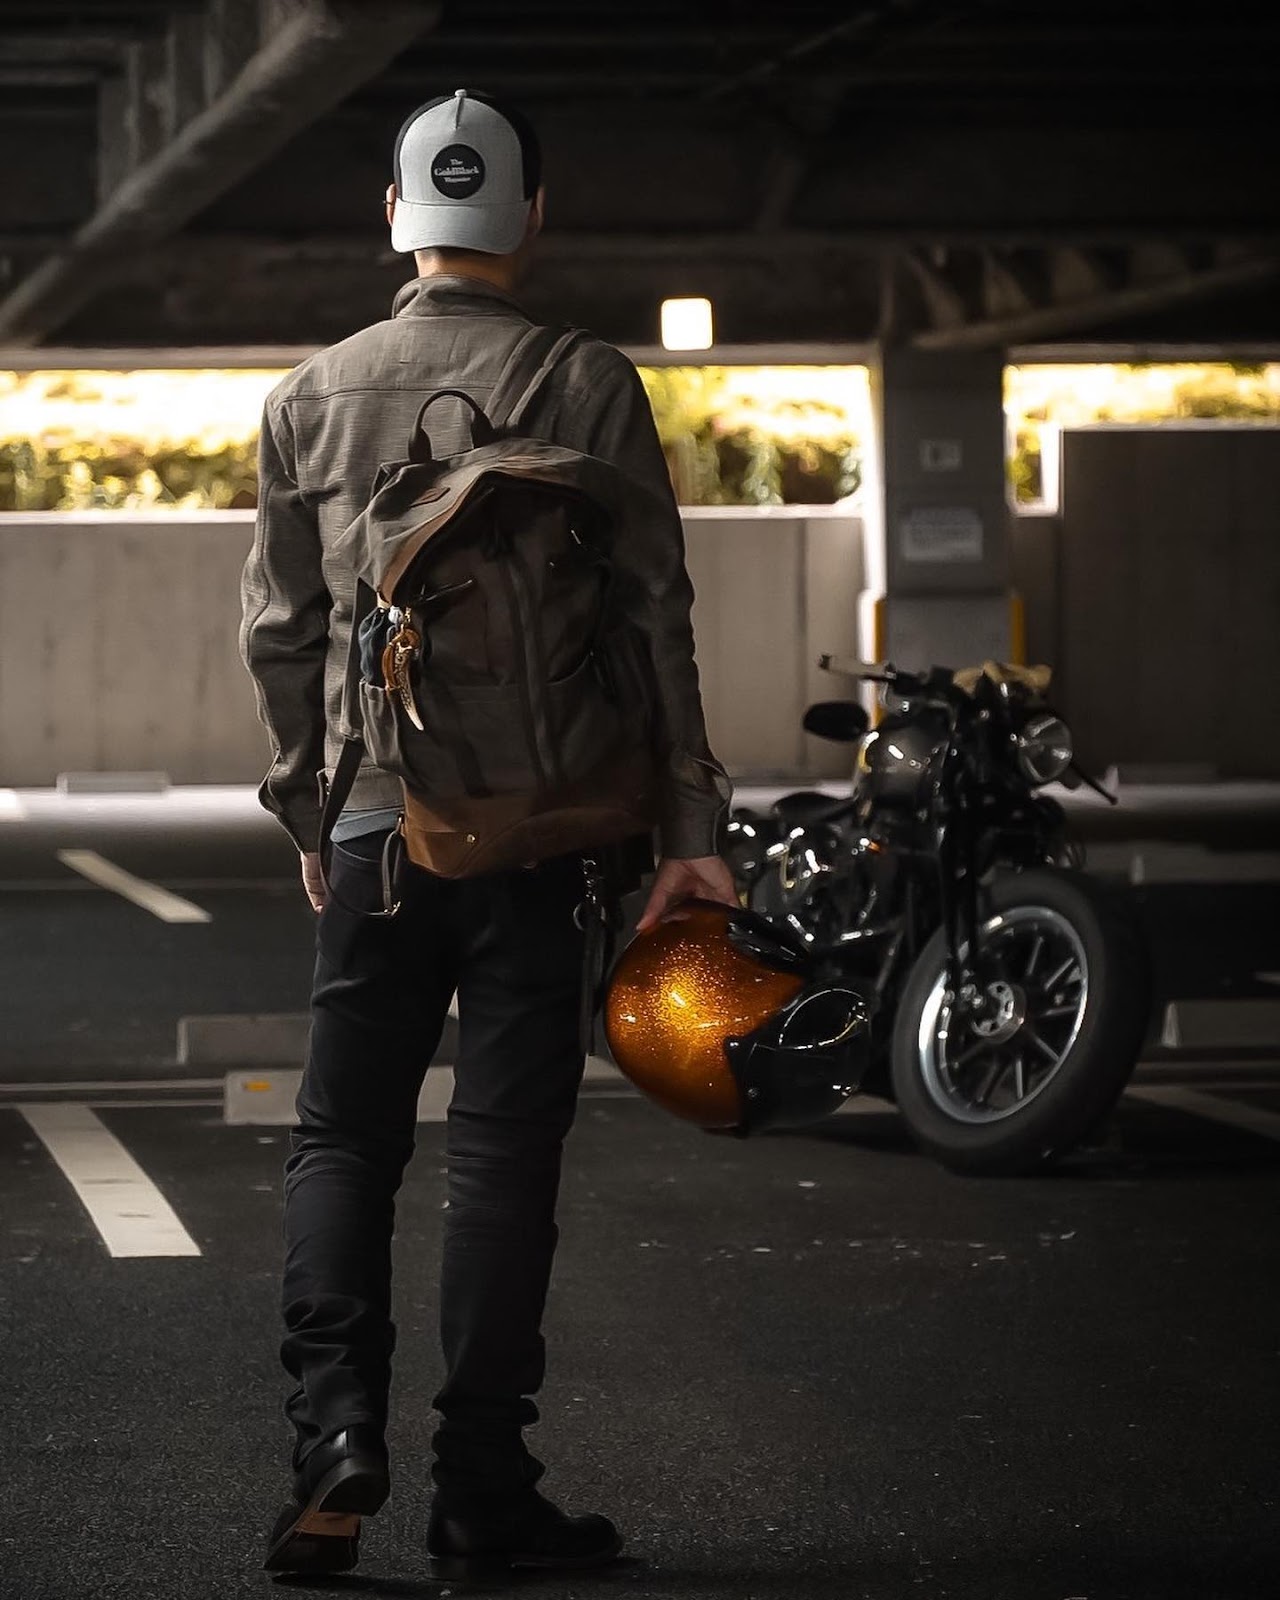 Wax canvas backpack for guys who commute by motorcycle - TechBullion